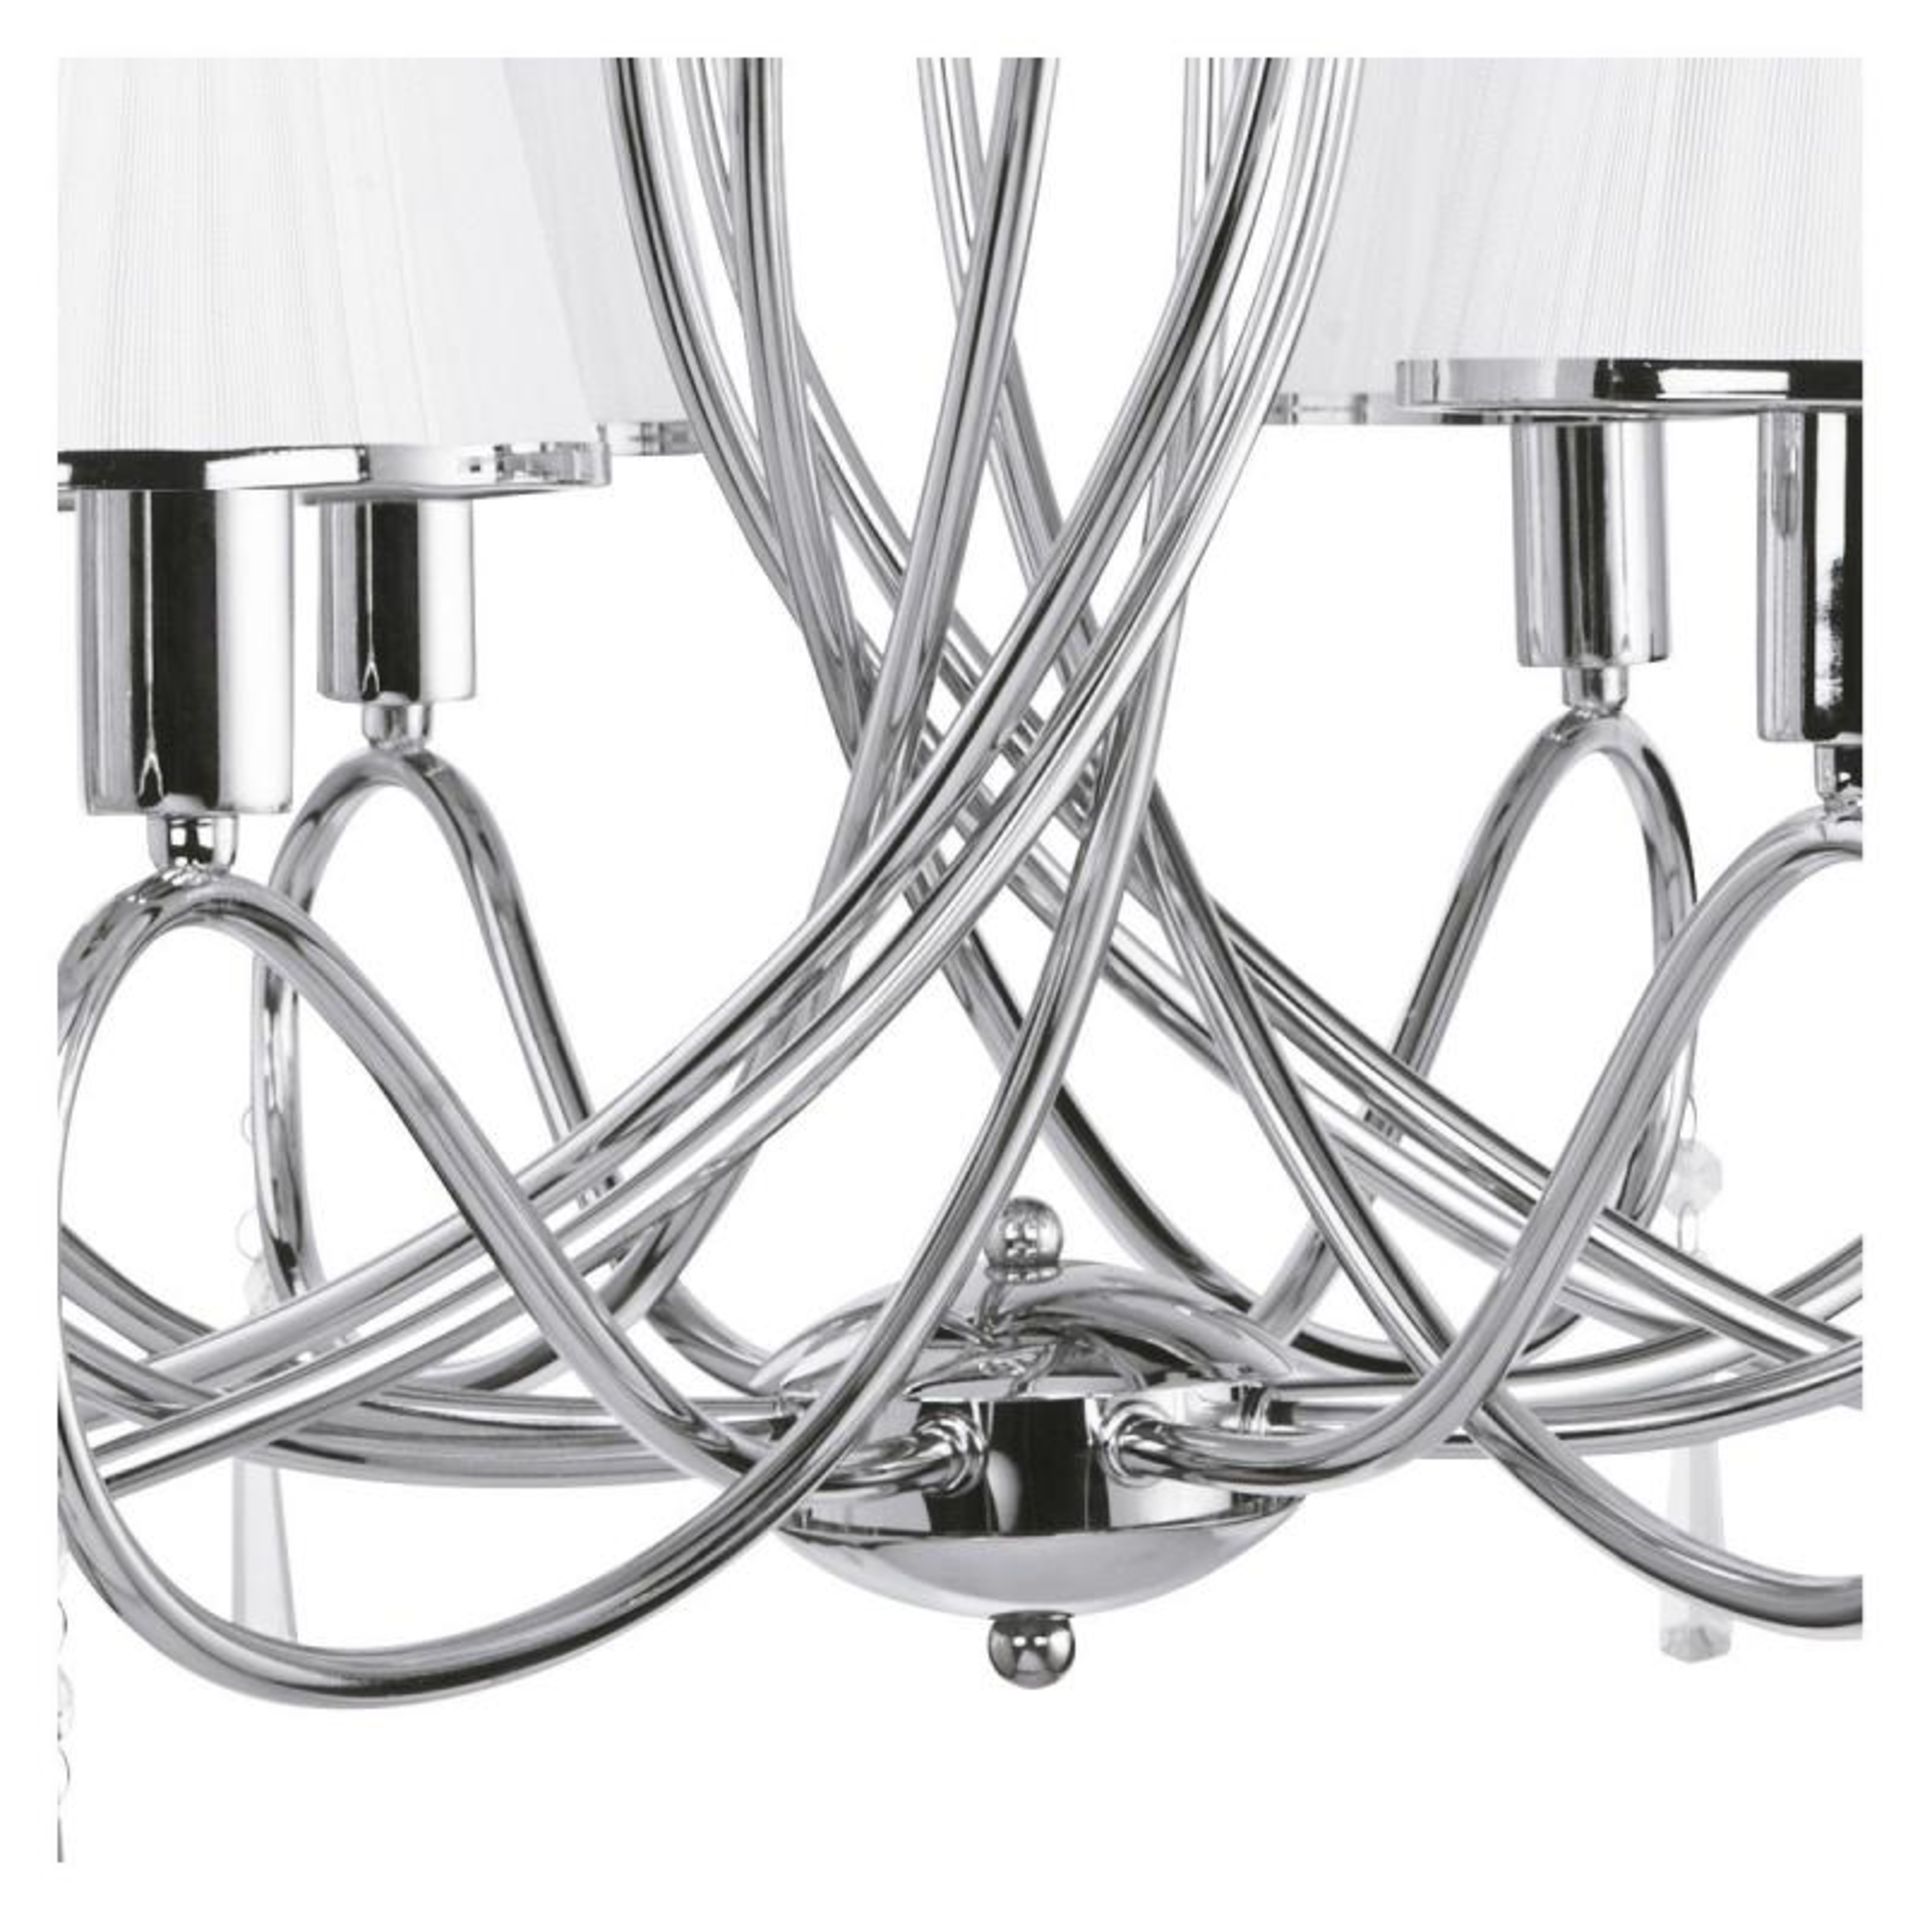 1 x Simplicity Chrome 5 Light Fitting With Glass Drops and White String Shades - Ex Display Stock - - Image 5 of 6